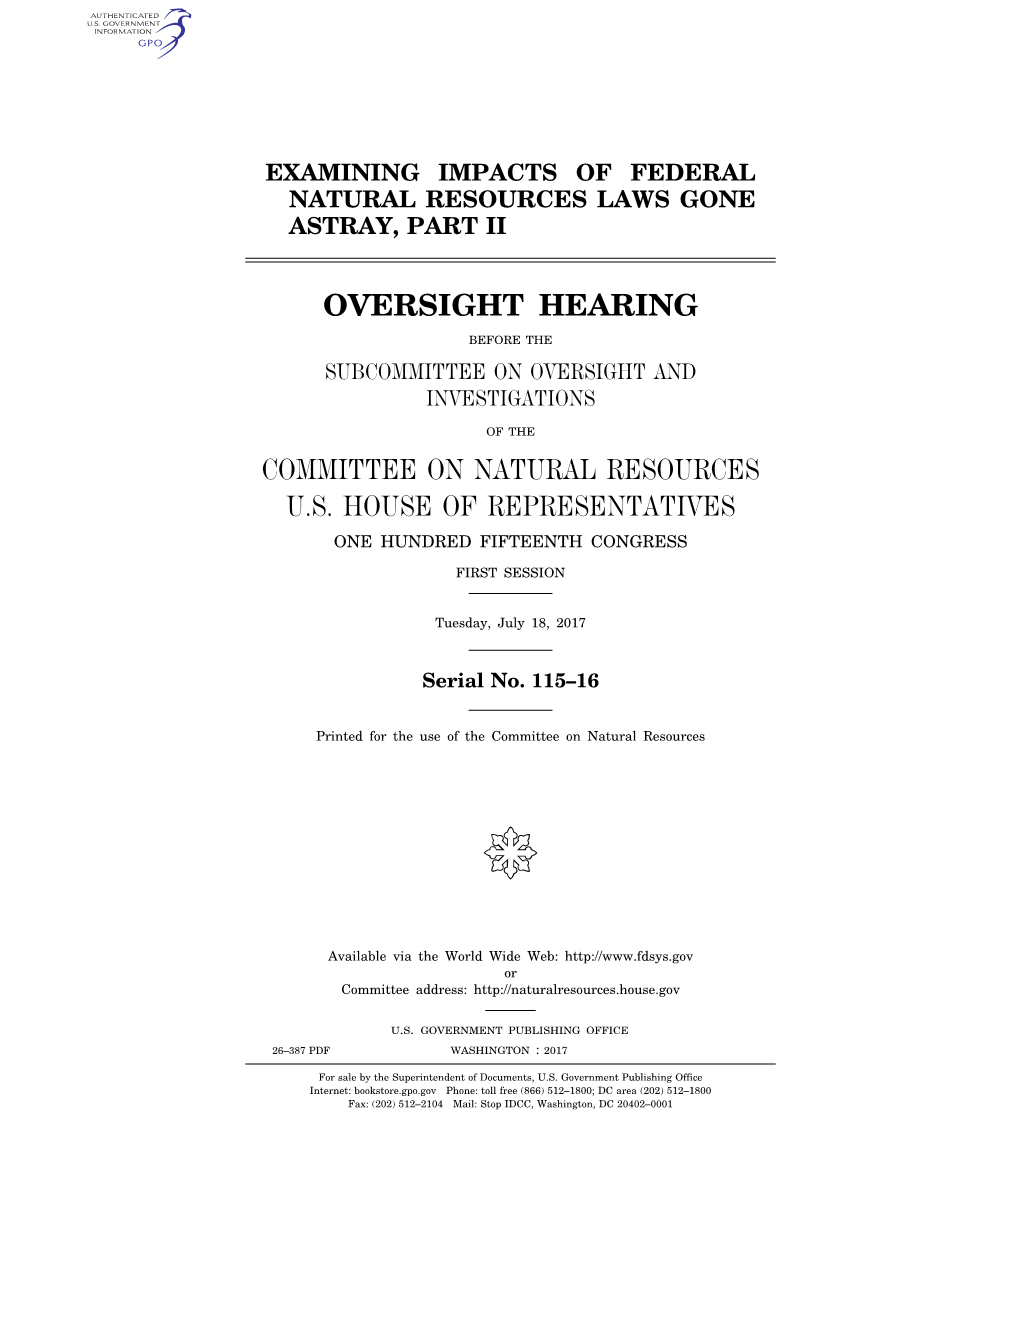 Oversight Hearing Committee on Natural Resources U.S